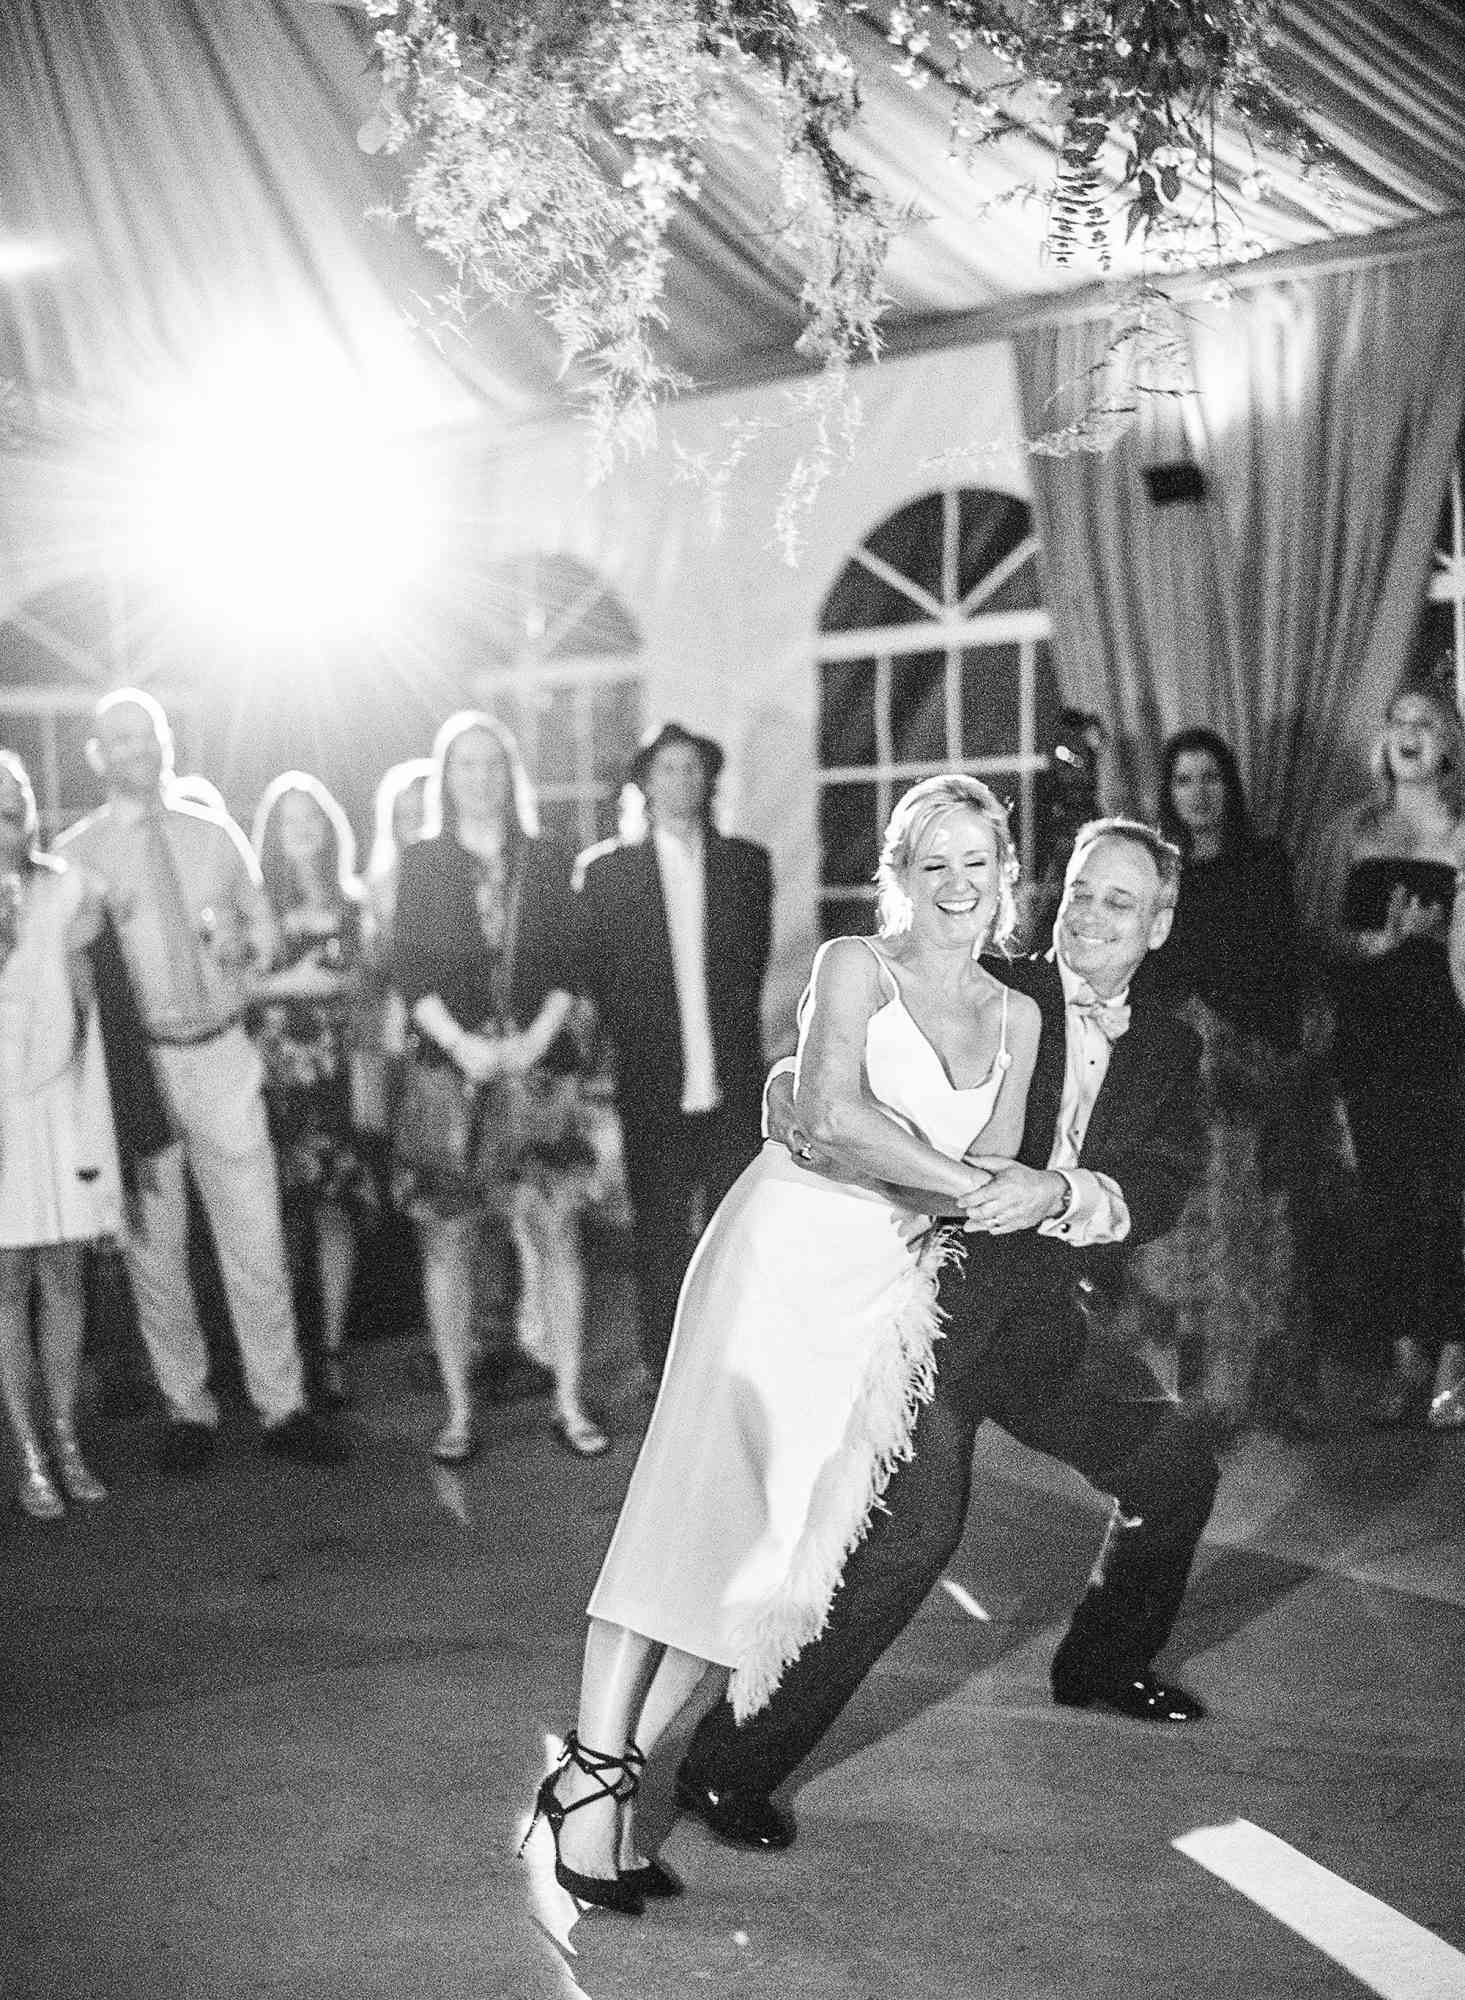 A Choreographed First Dance